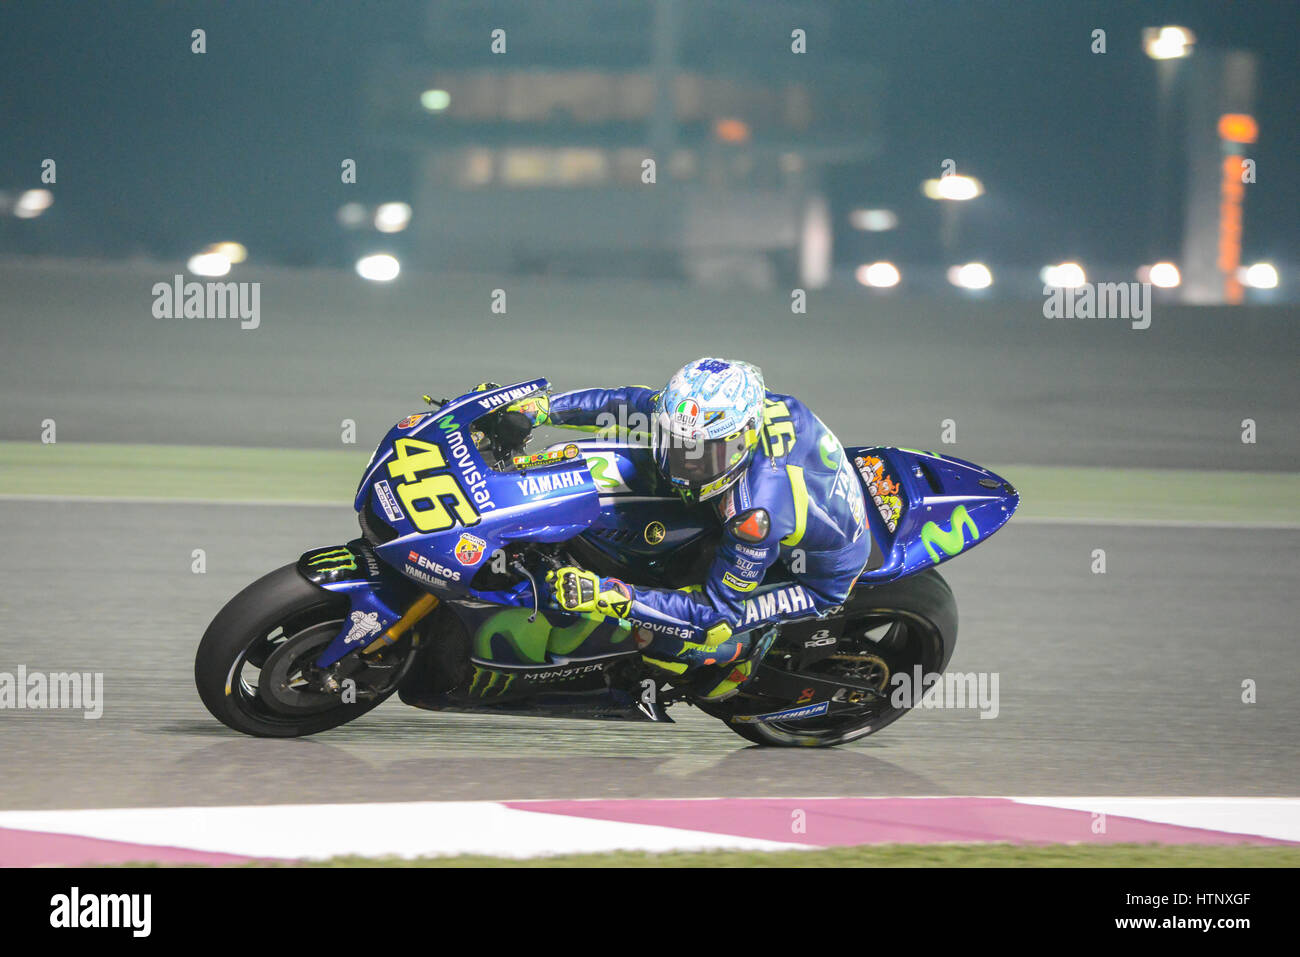 Losail Circuit, Qatar. 12th Mar, 2017. Valentino Rossi who rides for Movistar Yamaha during the final day of the Qatar MotoGP winter test at Losail International Circuit. Credit: Gina Layva/Alamy Live News Stock Photo